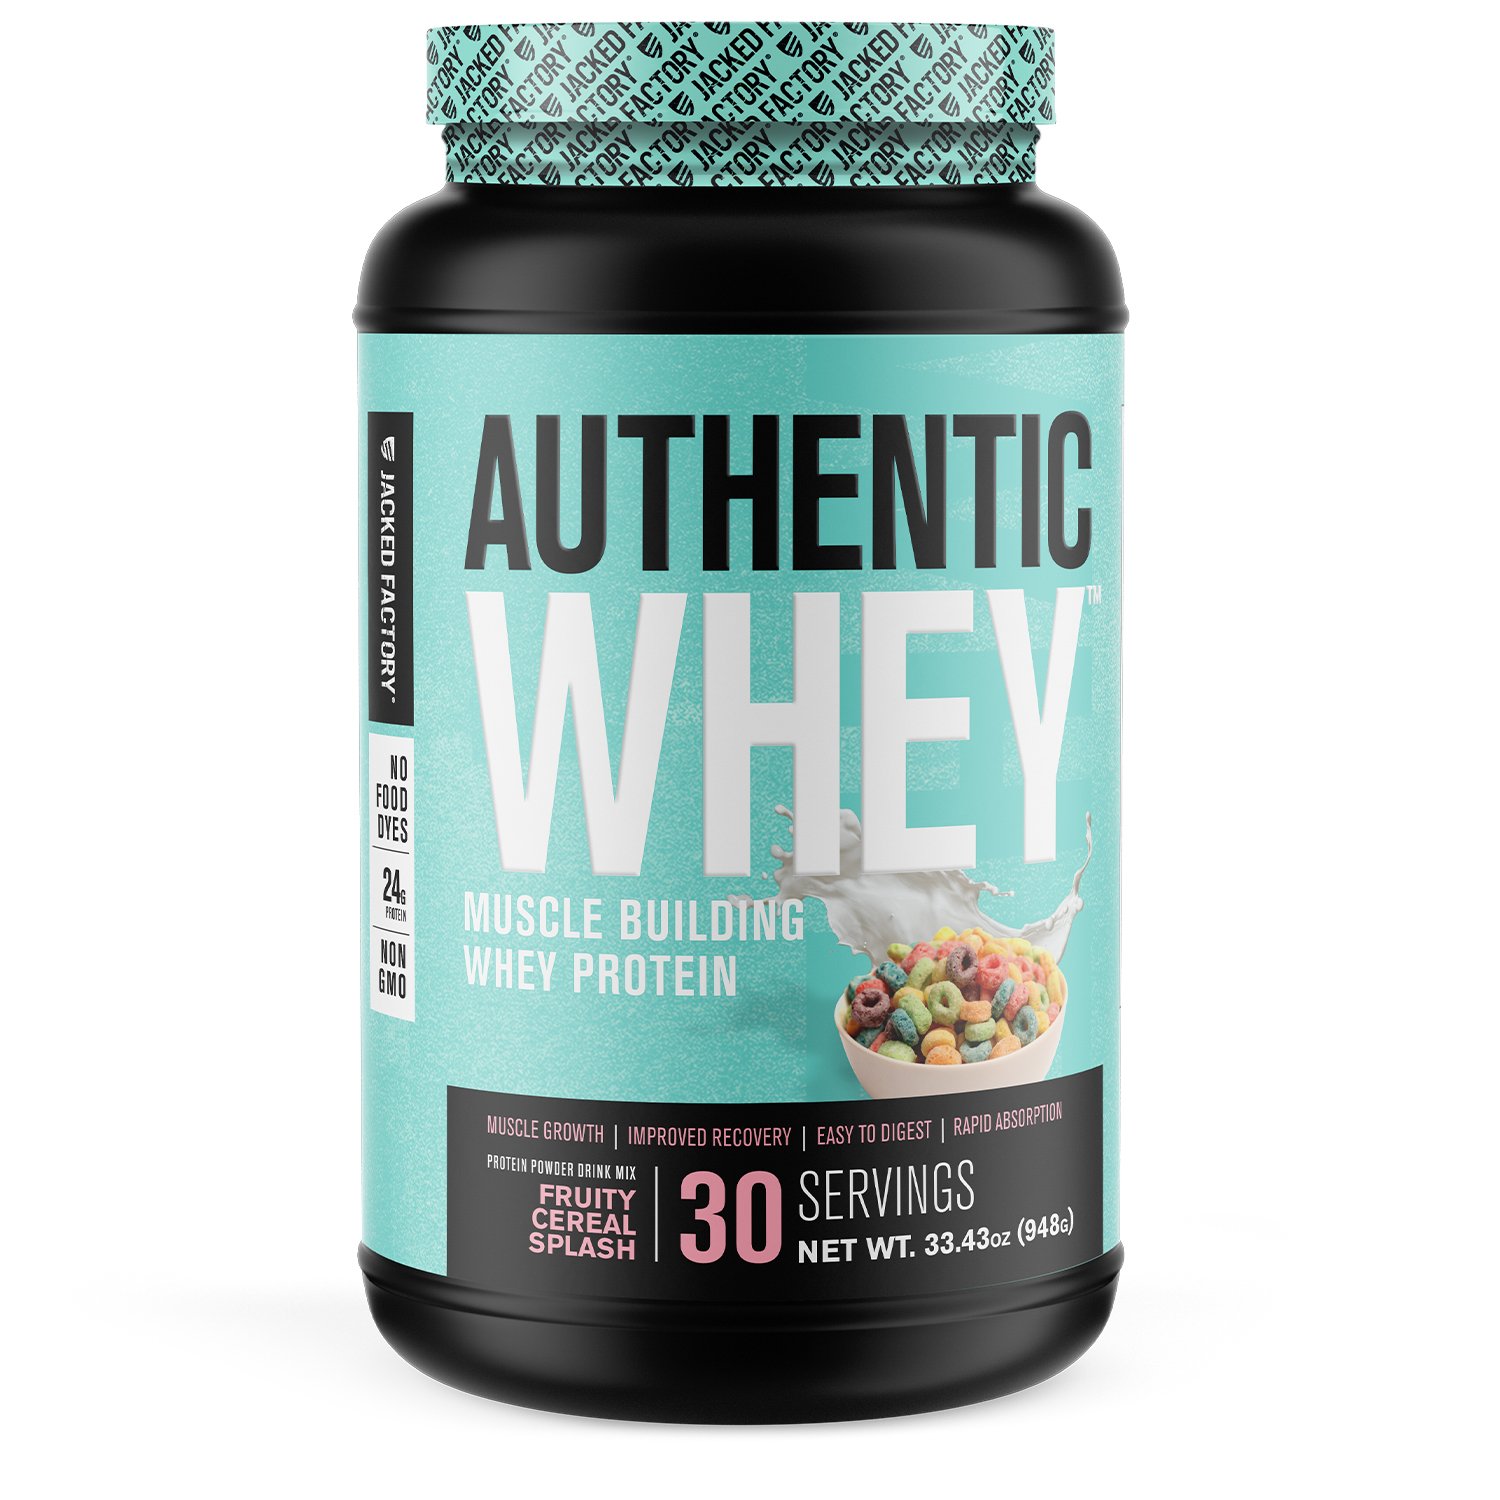 Authentic Whey by Jacked Factory